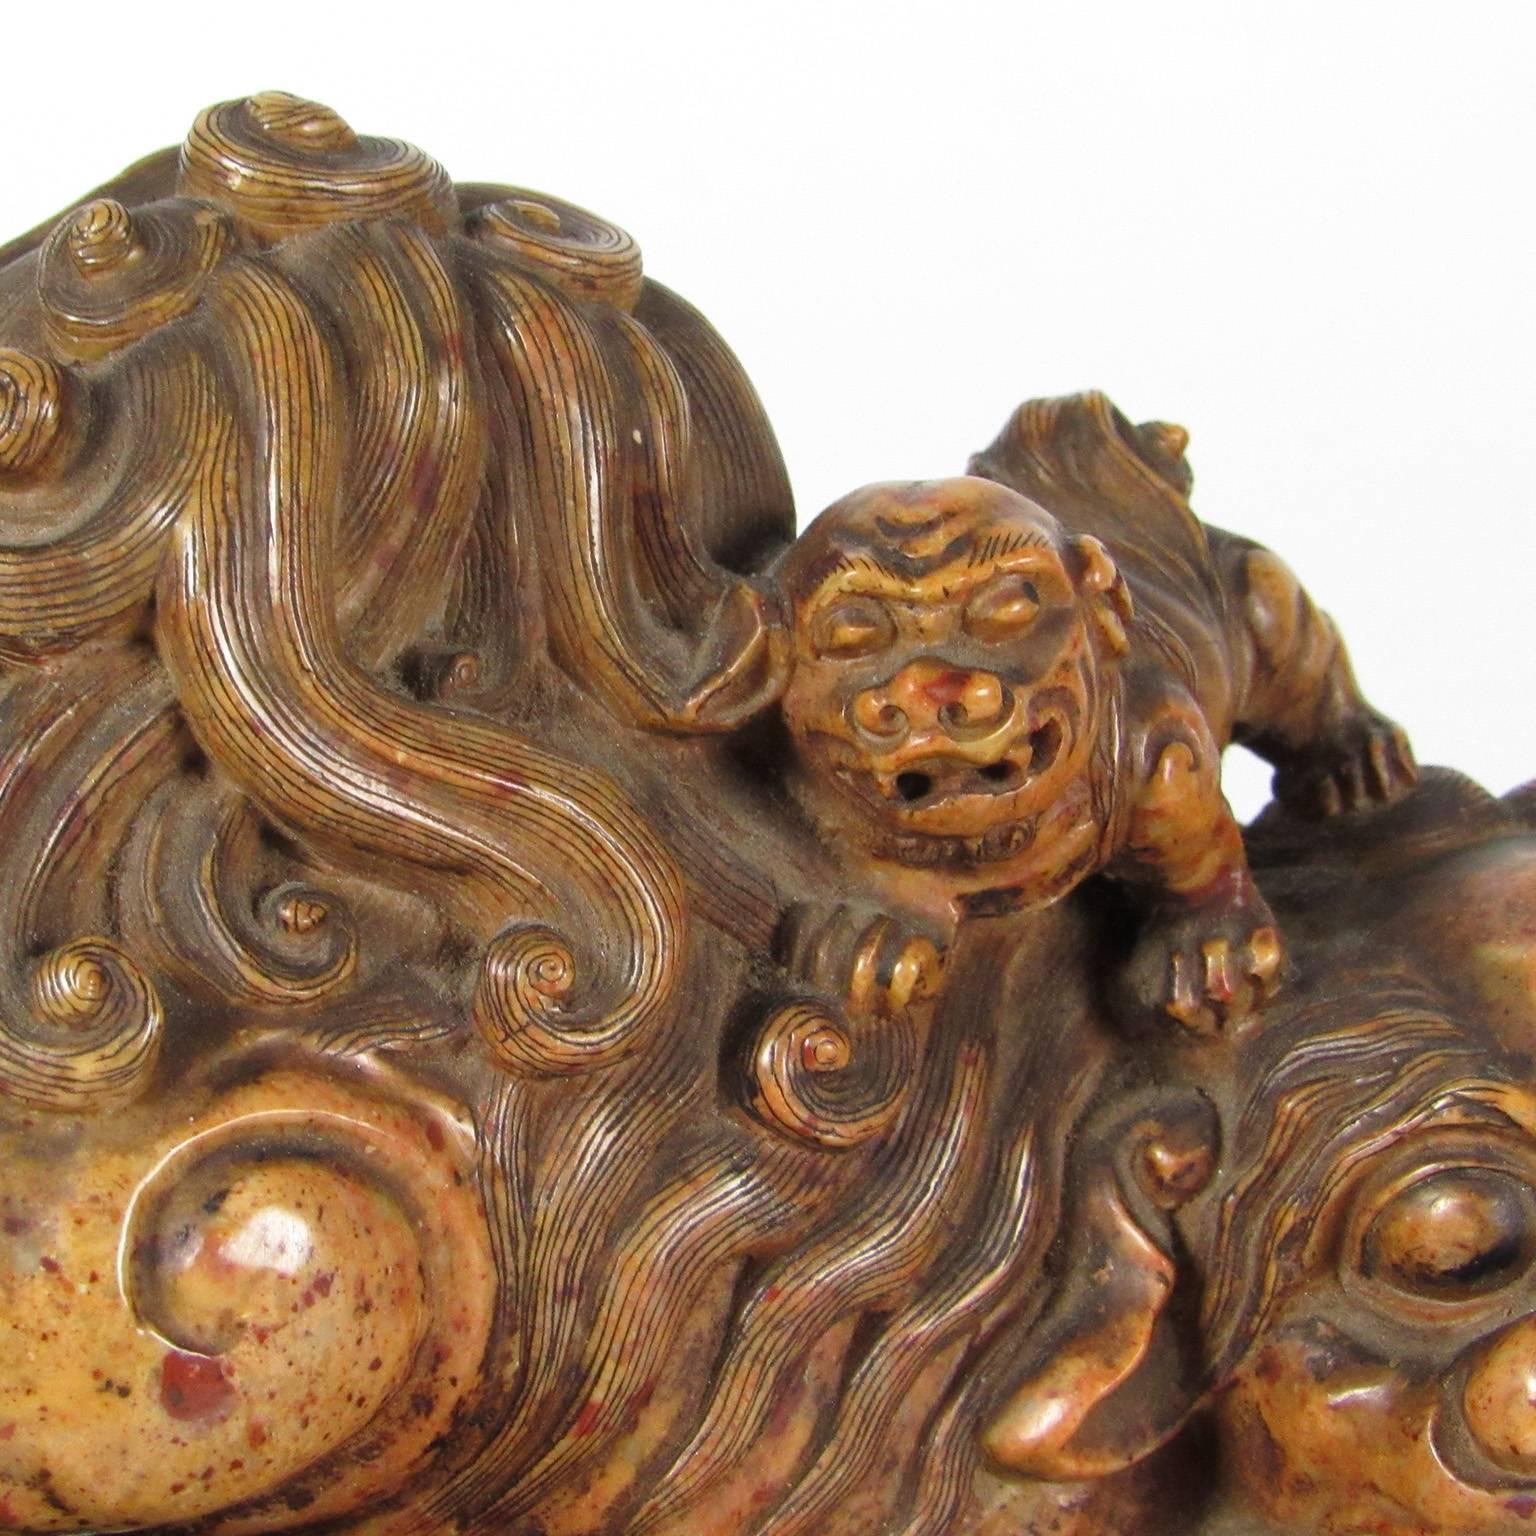 Excellent antique Chinese soapstone carving of a foo lion, with a litter of pups, 19th century. Excellent provenance available to buyer.
Dimensions: 6 x 8 1/2 x 4 inches.